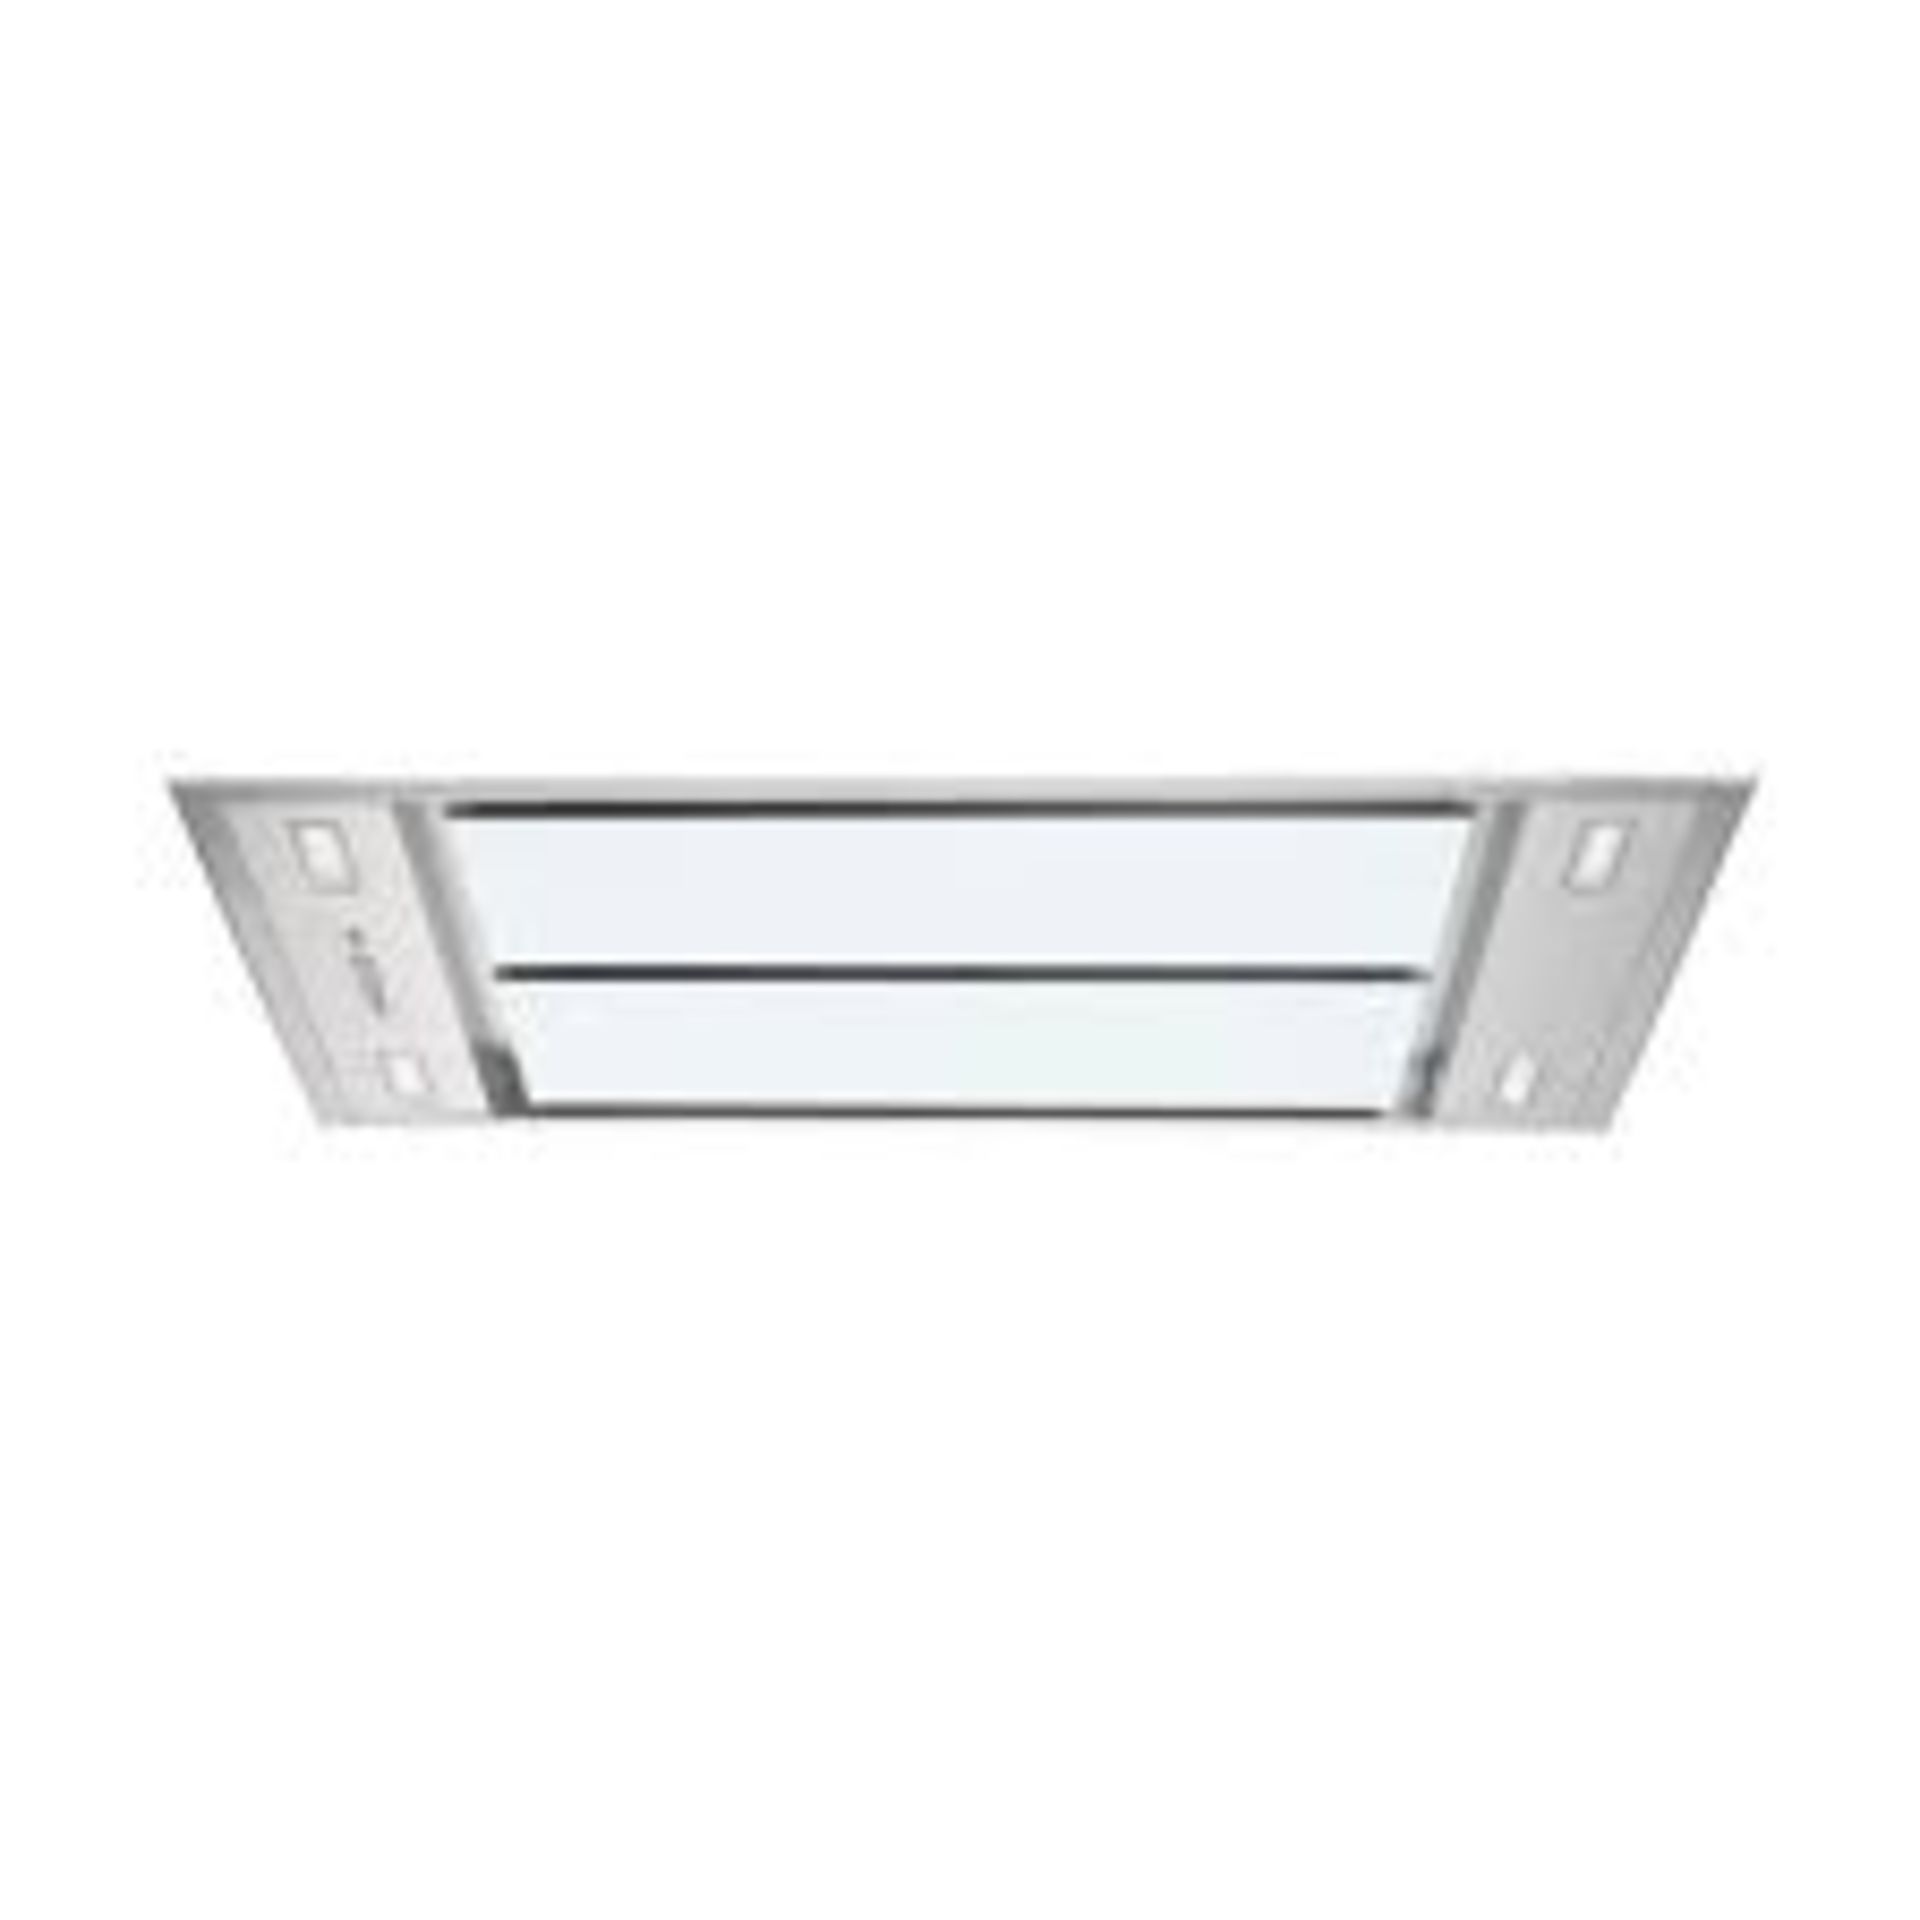 Boxed UBADCH110W White Ceiling Cooker Hood RRP £600 (Pictures Are For Illustration Purposes Only) (